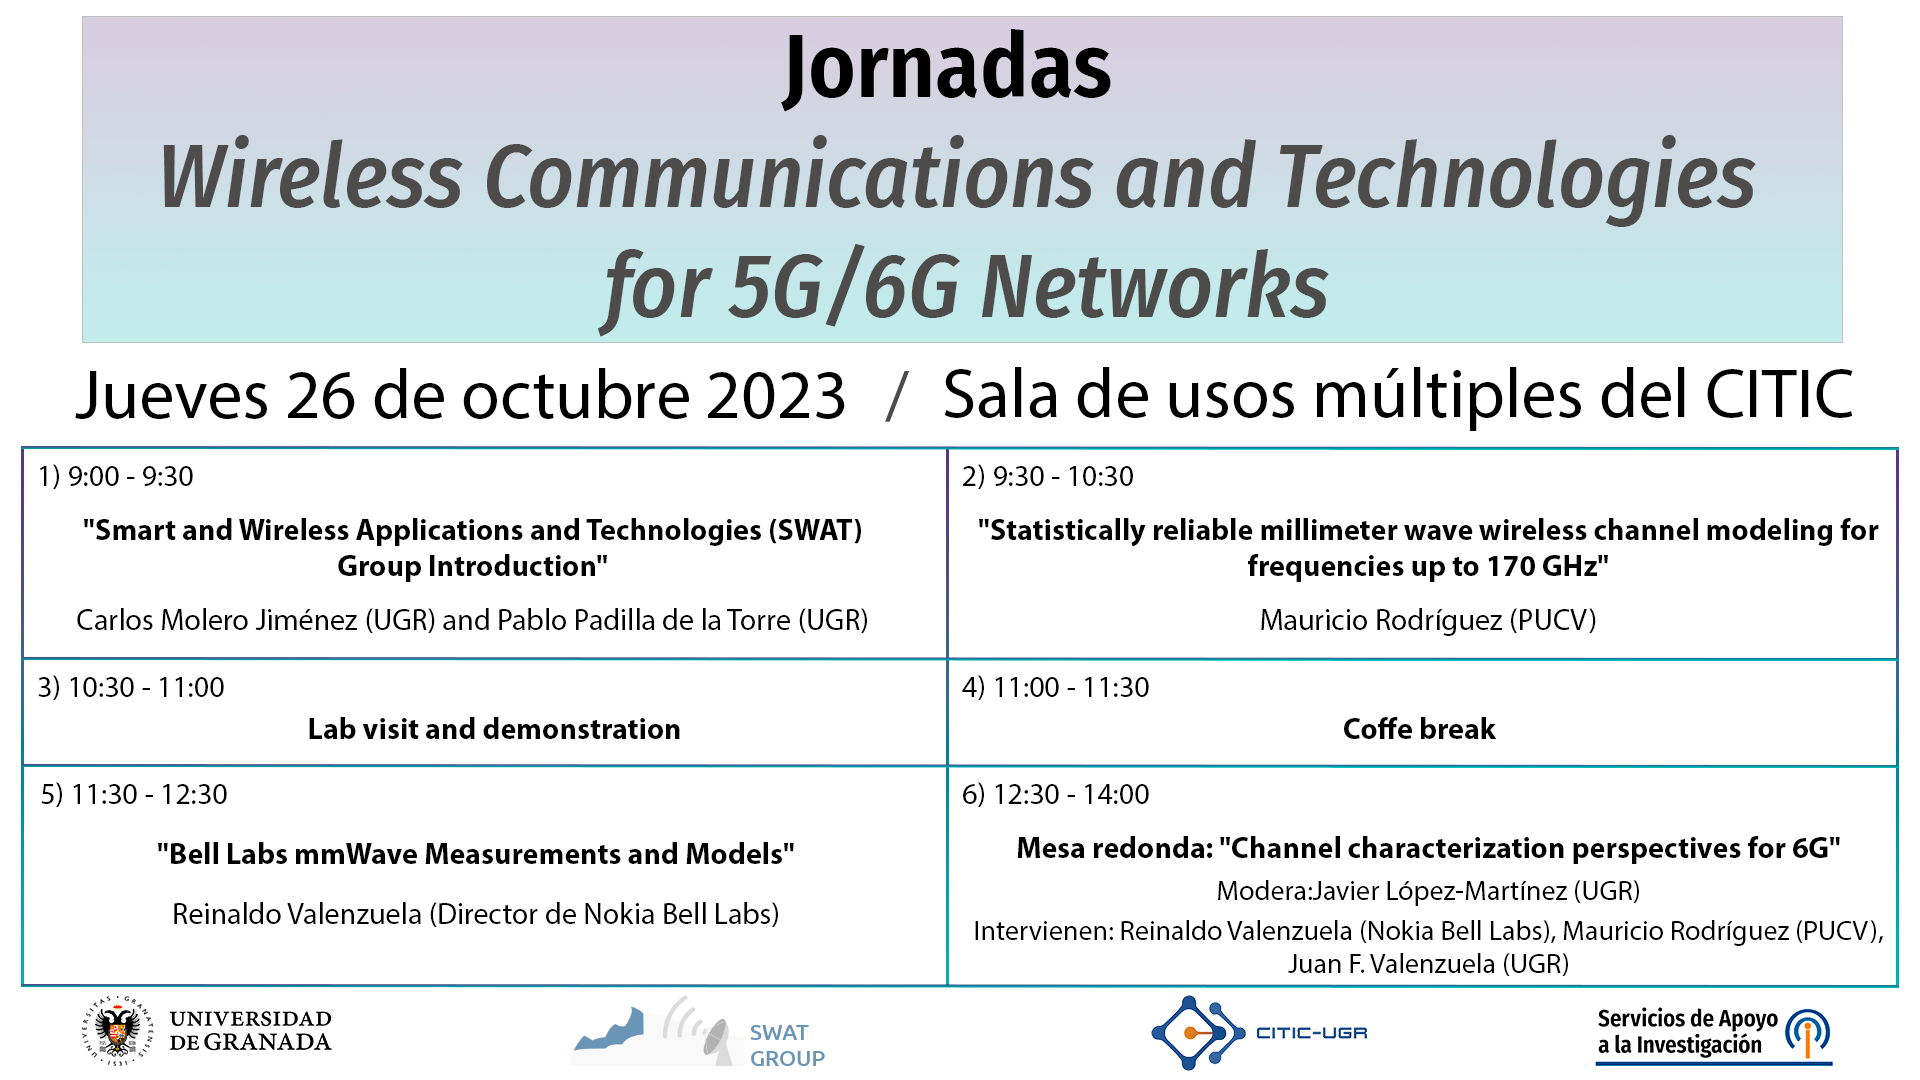 Jornadas Wireless Communications and Technologies for 5G/6G Networks